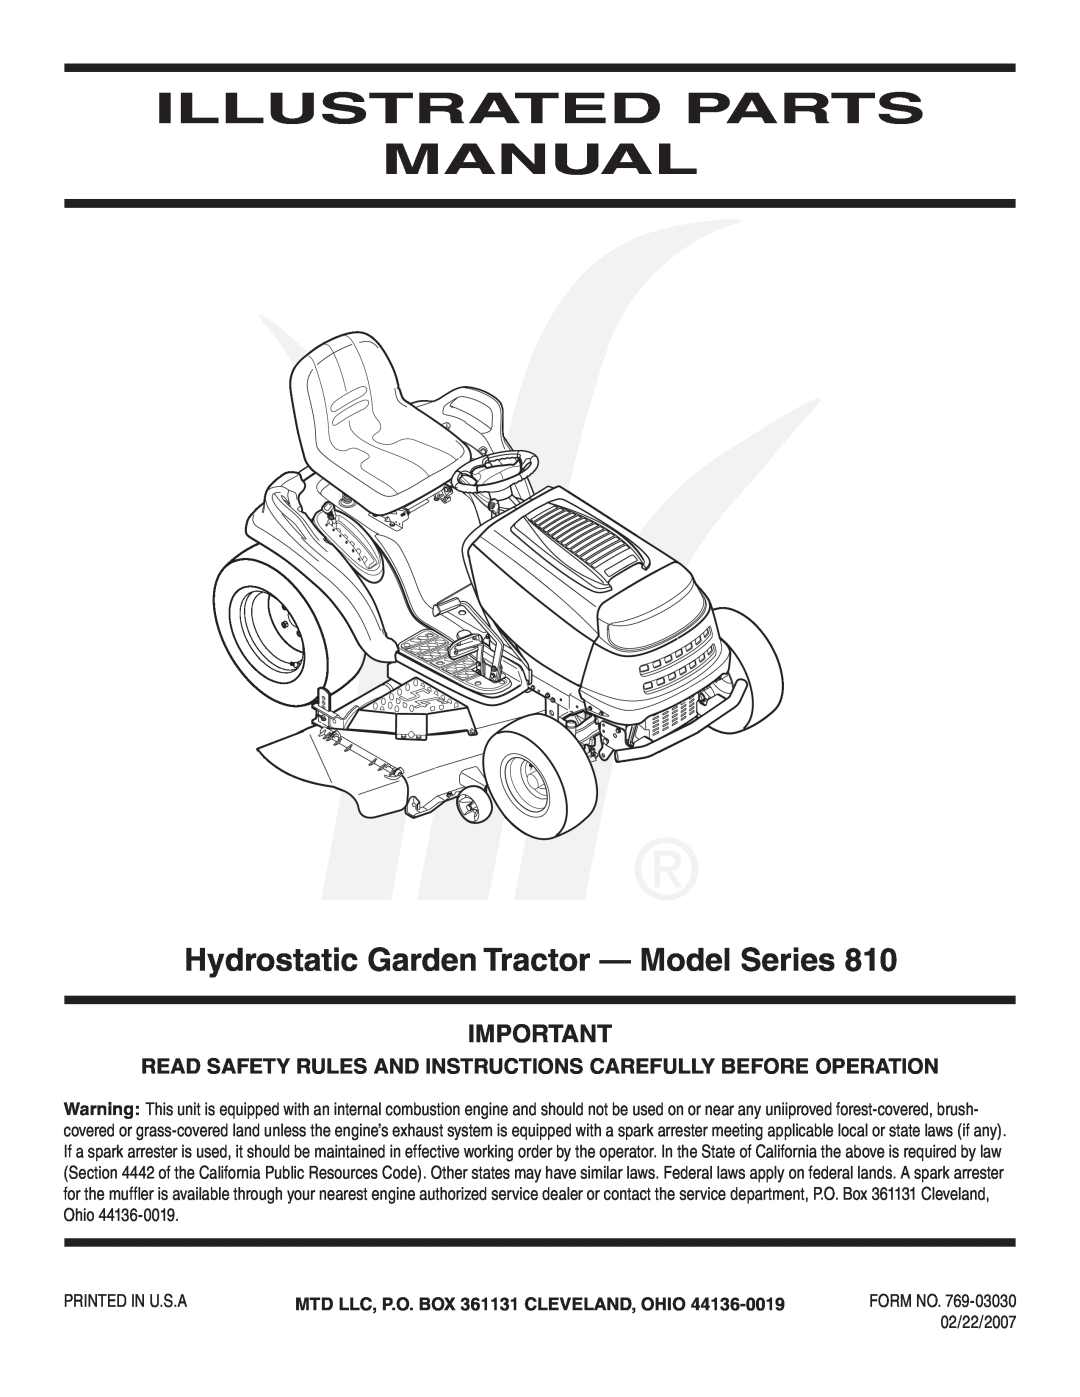 MTD 810 manual Read Safety Rules And Instructions Carefully Before Operation, MTD LLC, P.O. BOX 361131 CLEVELAND, OHIO 